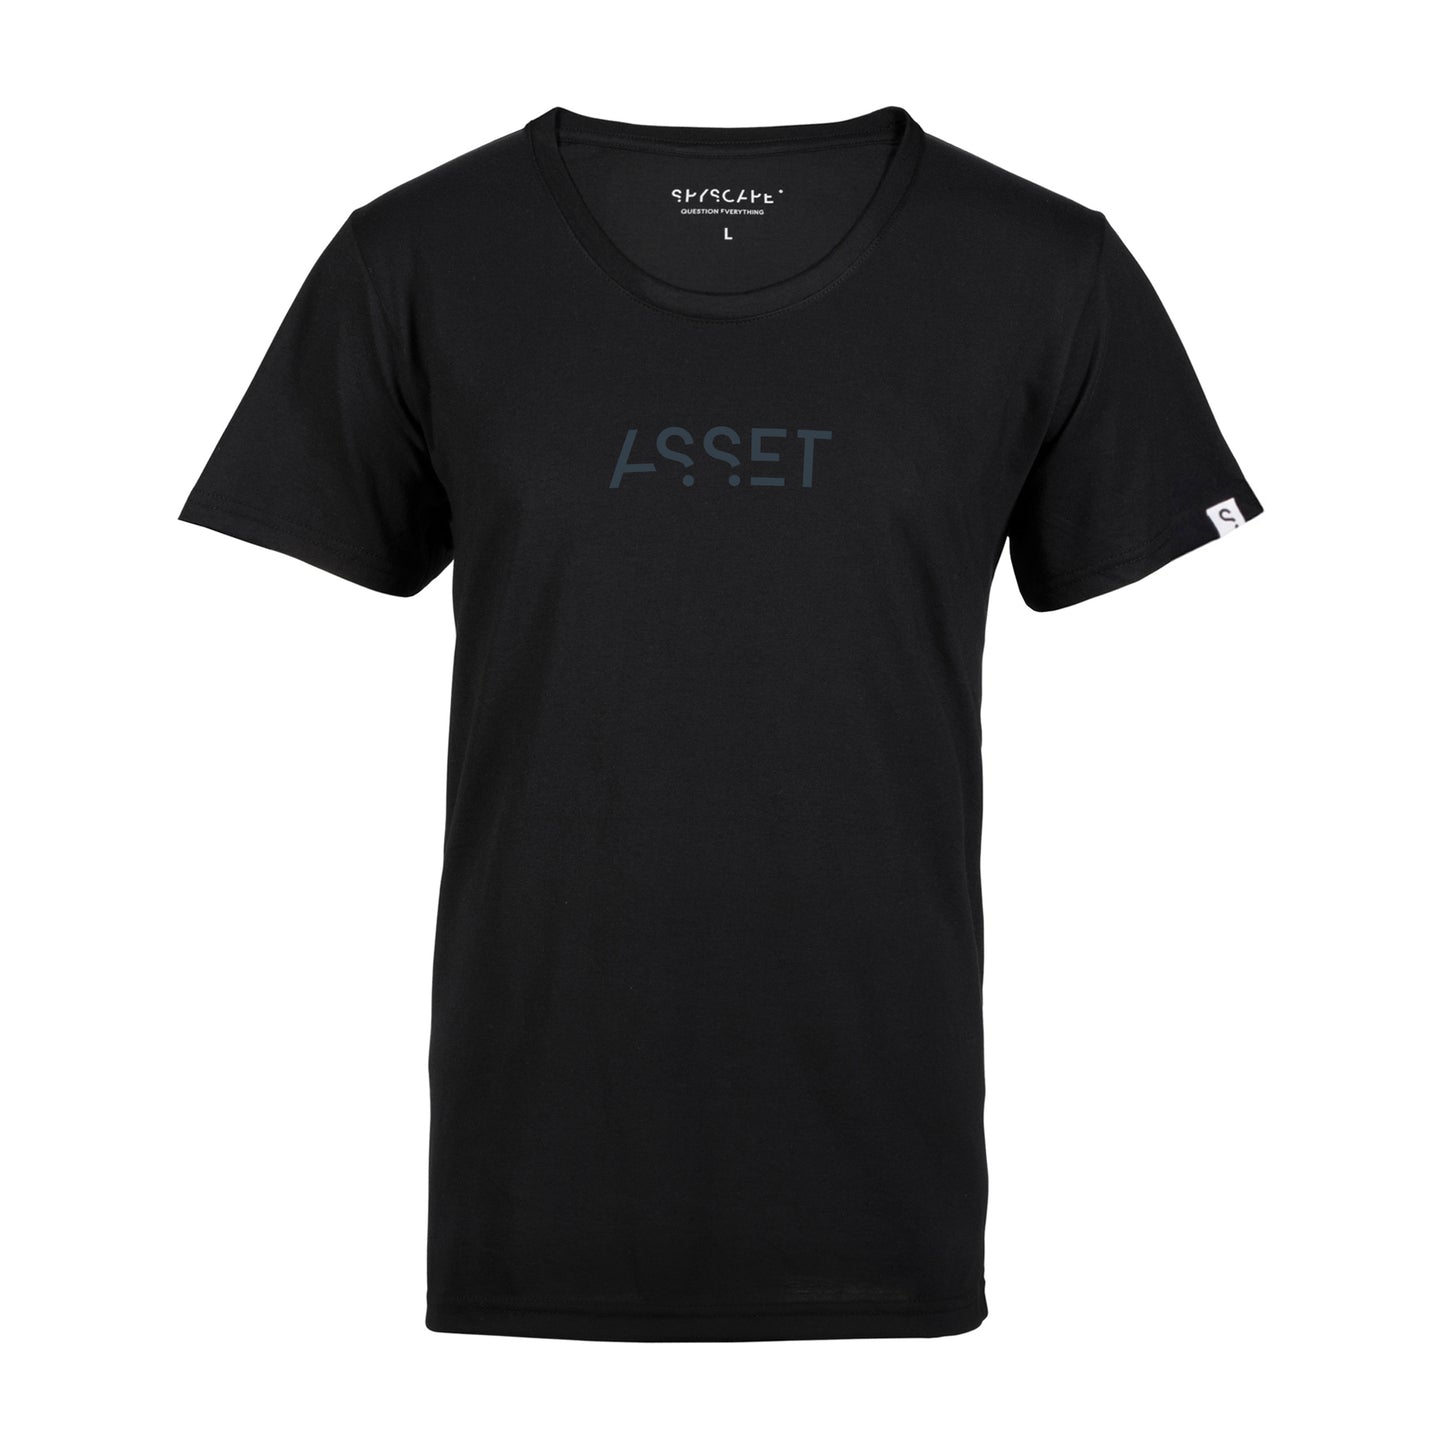 SPYSCAPE Asset T-Shirt with Hidden Zip Pocket - front view with ASSET printed on the chest